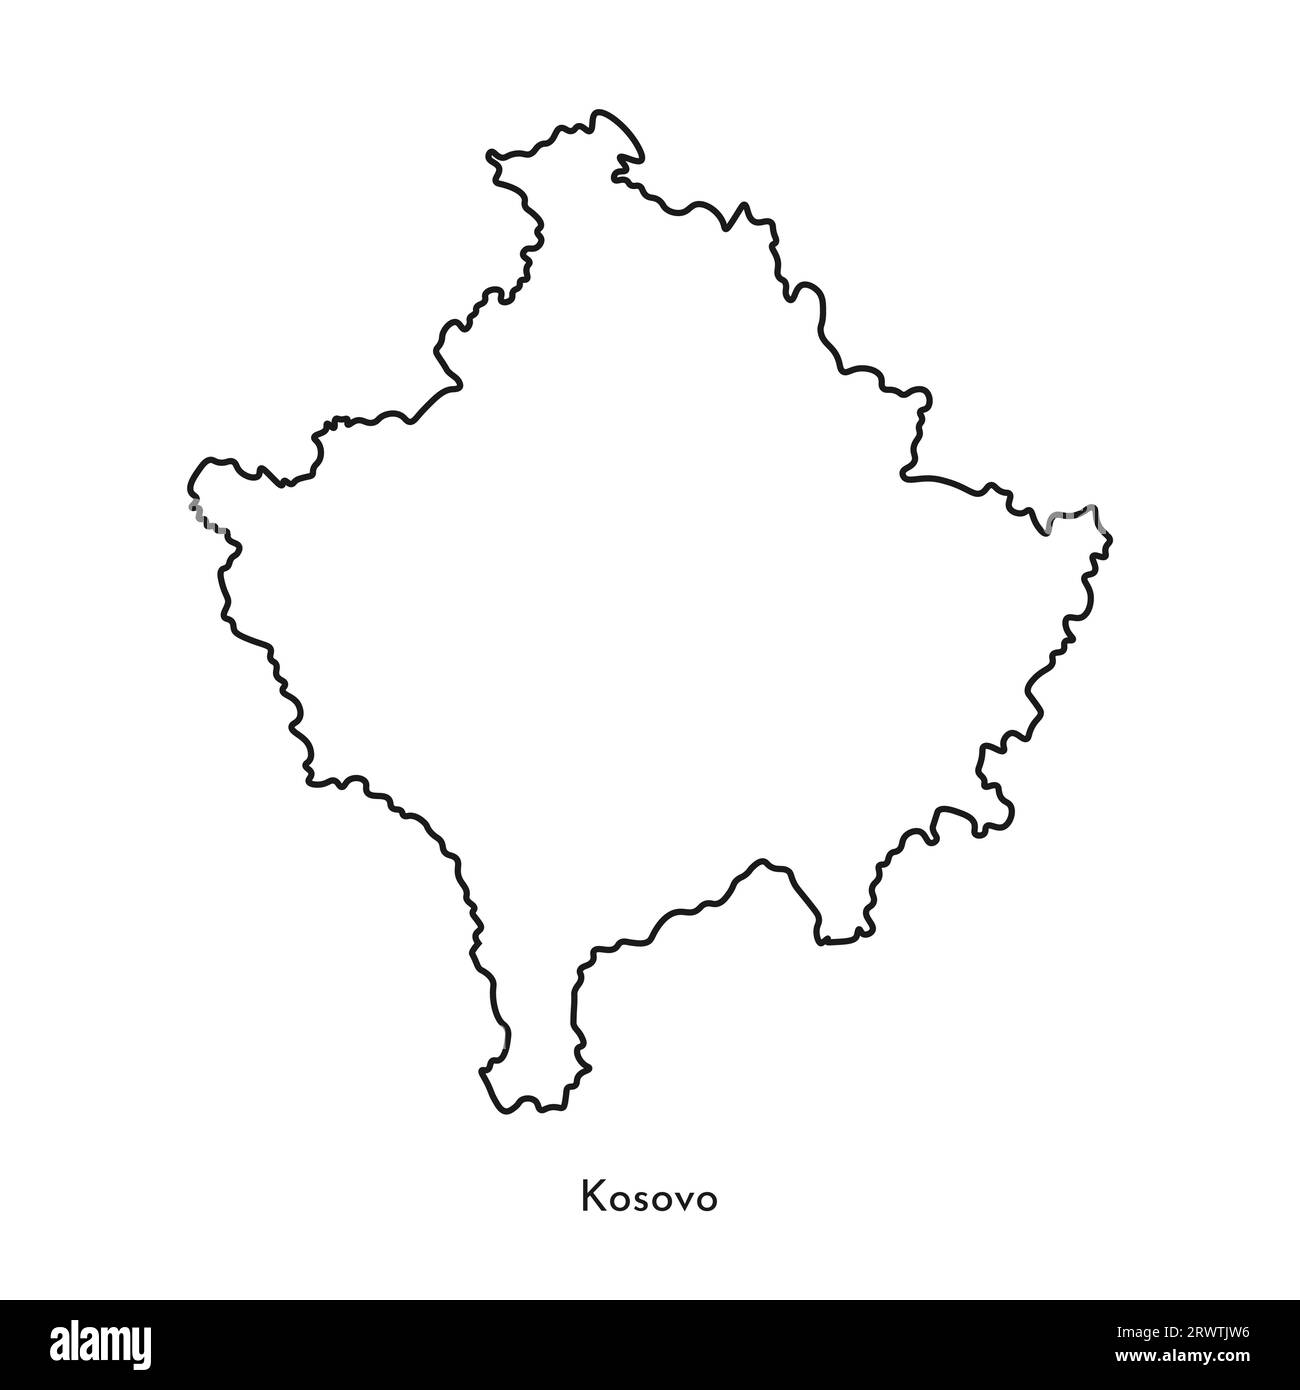 Vector isolated simplified illustration icon with black line silhouette of Kosovo map. White background. Stock Vector